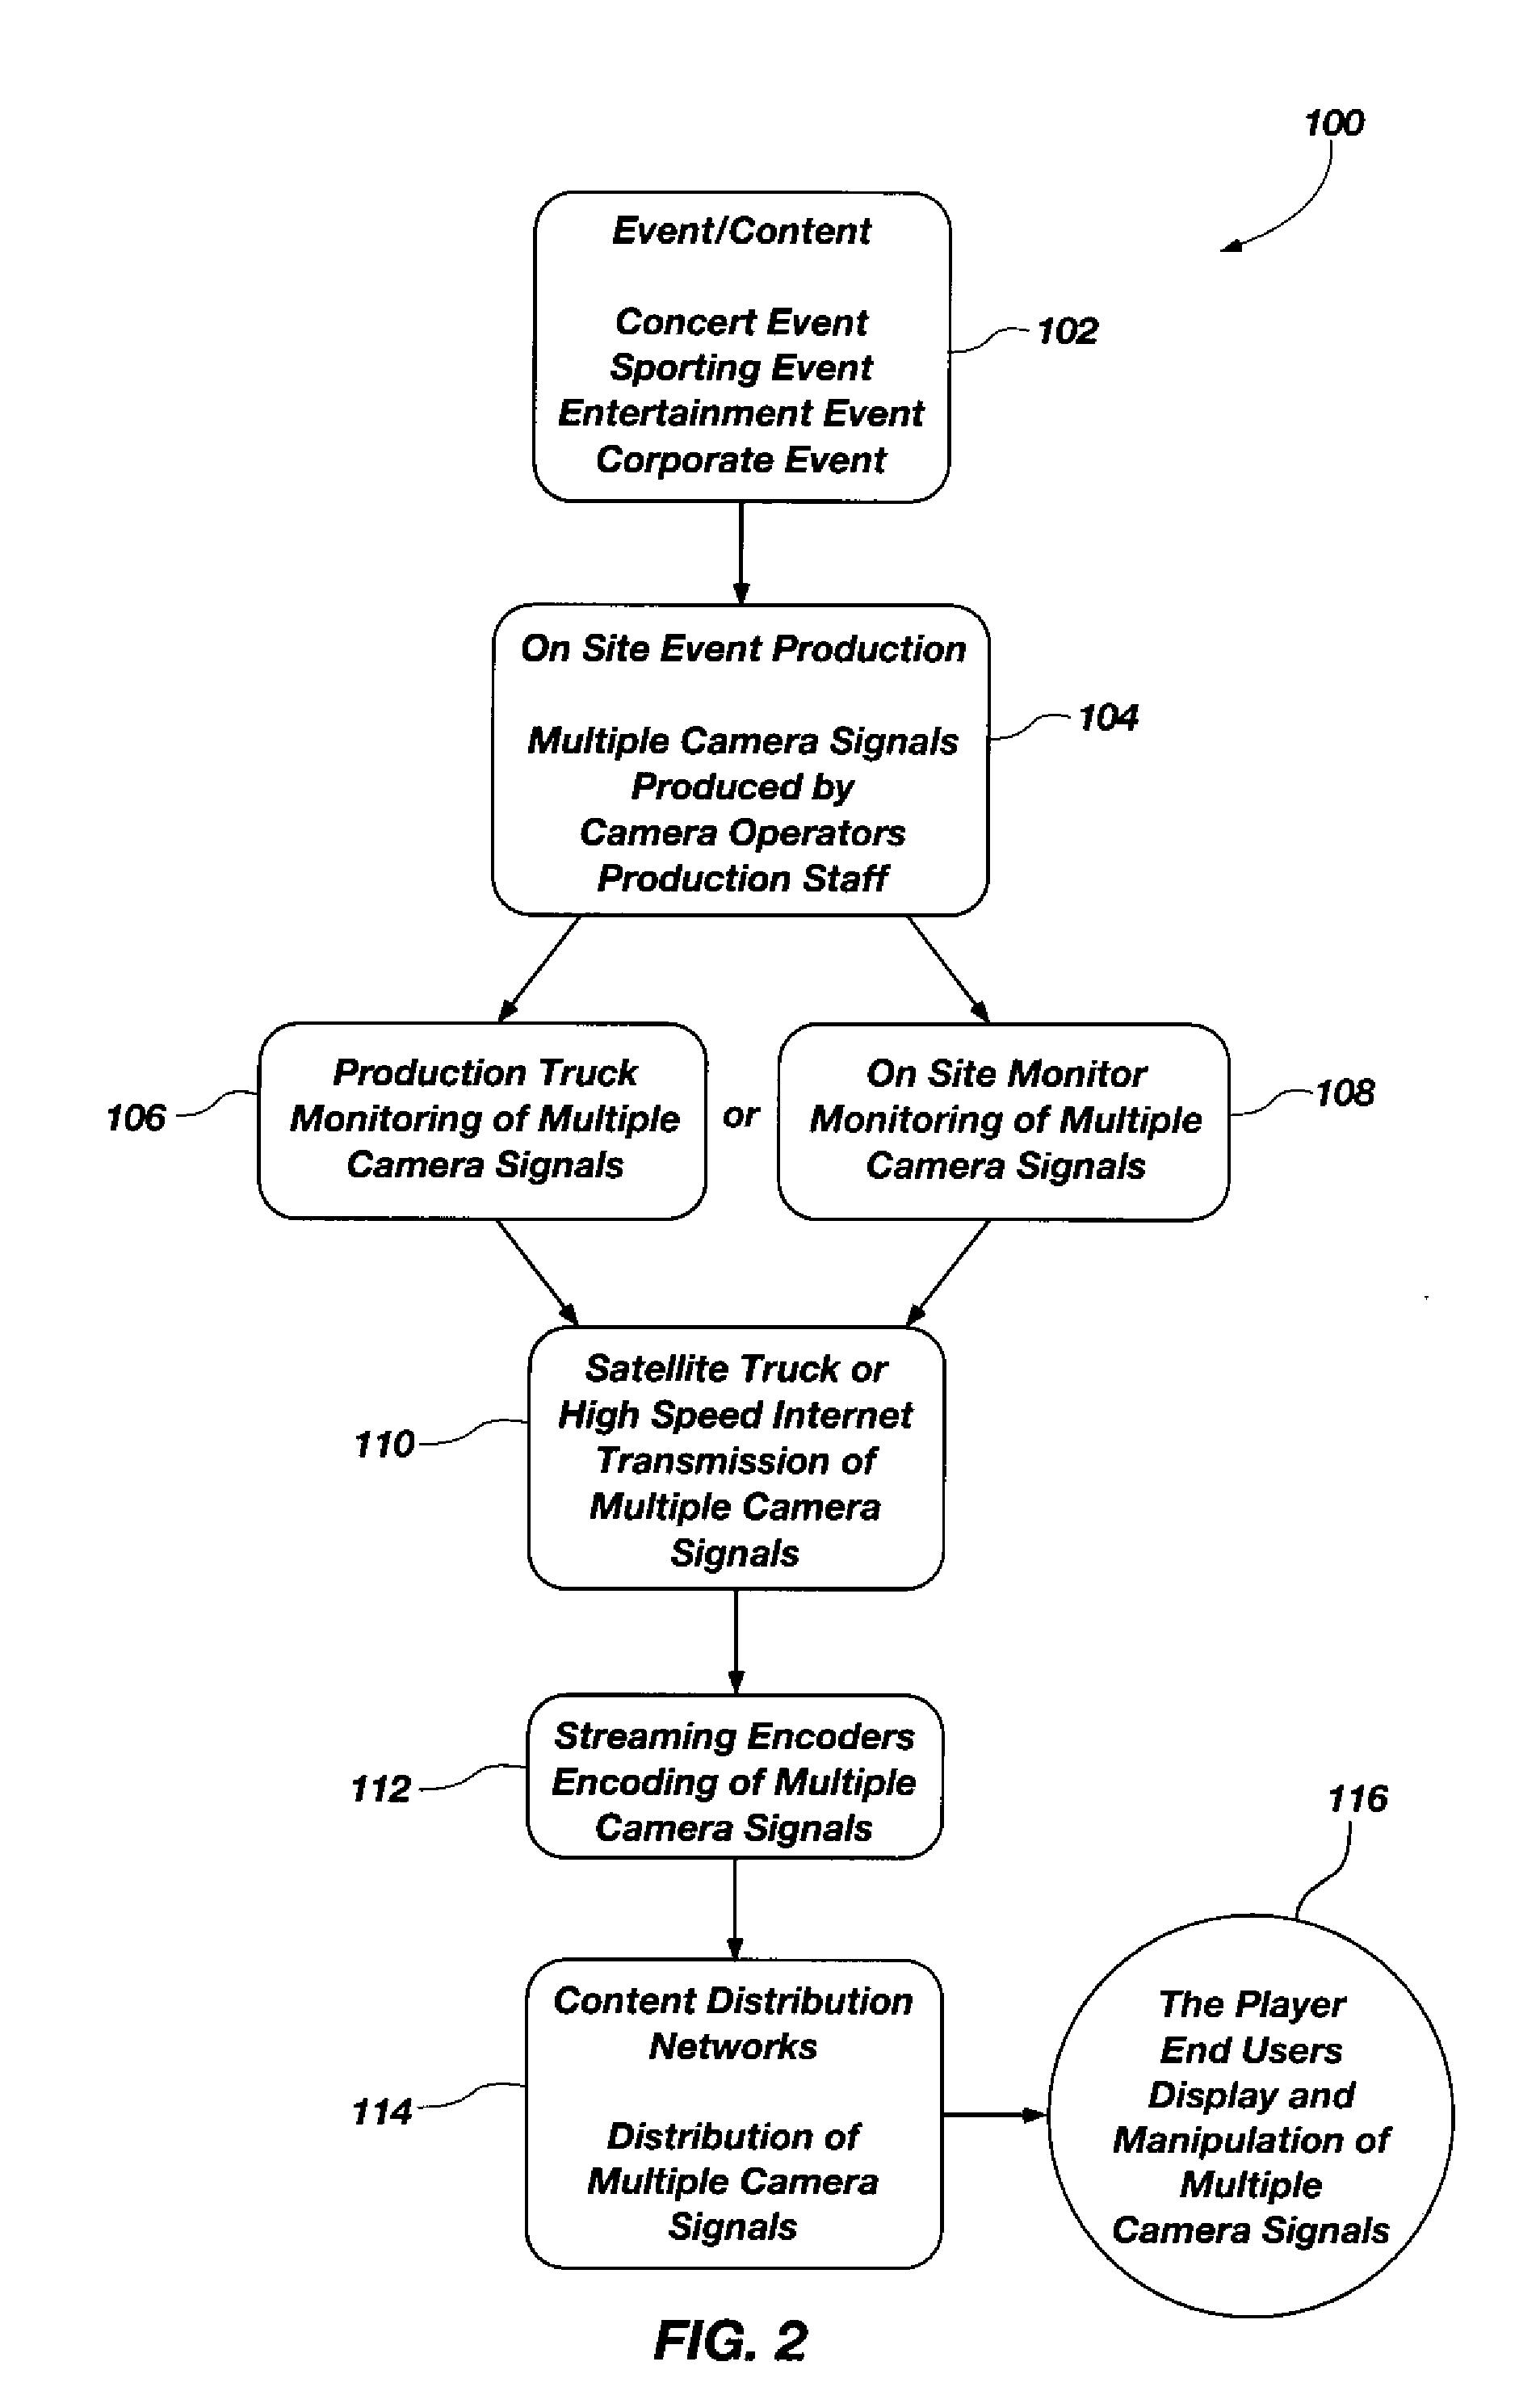 Media systems and methods for providing synchronized multiple streaming camera signals of an event